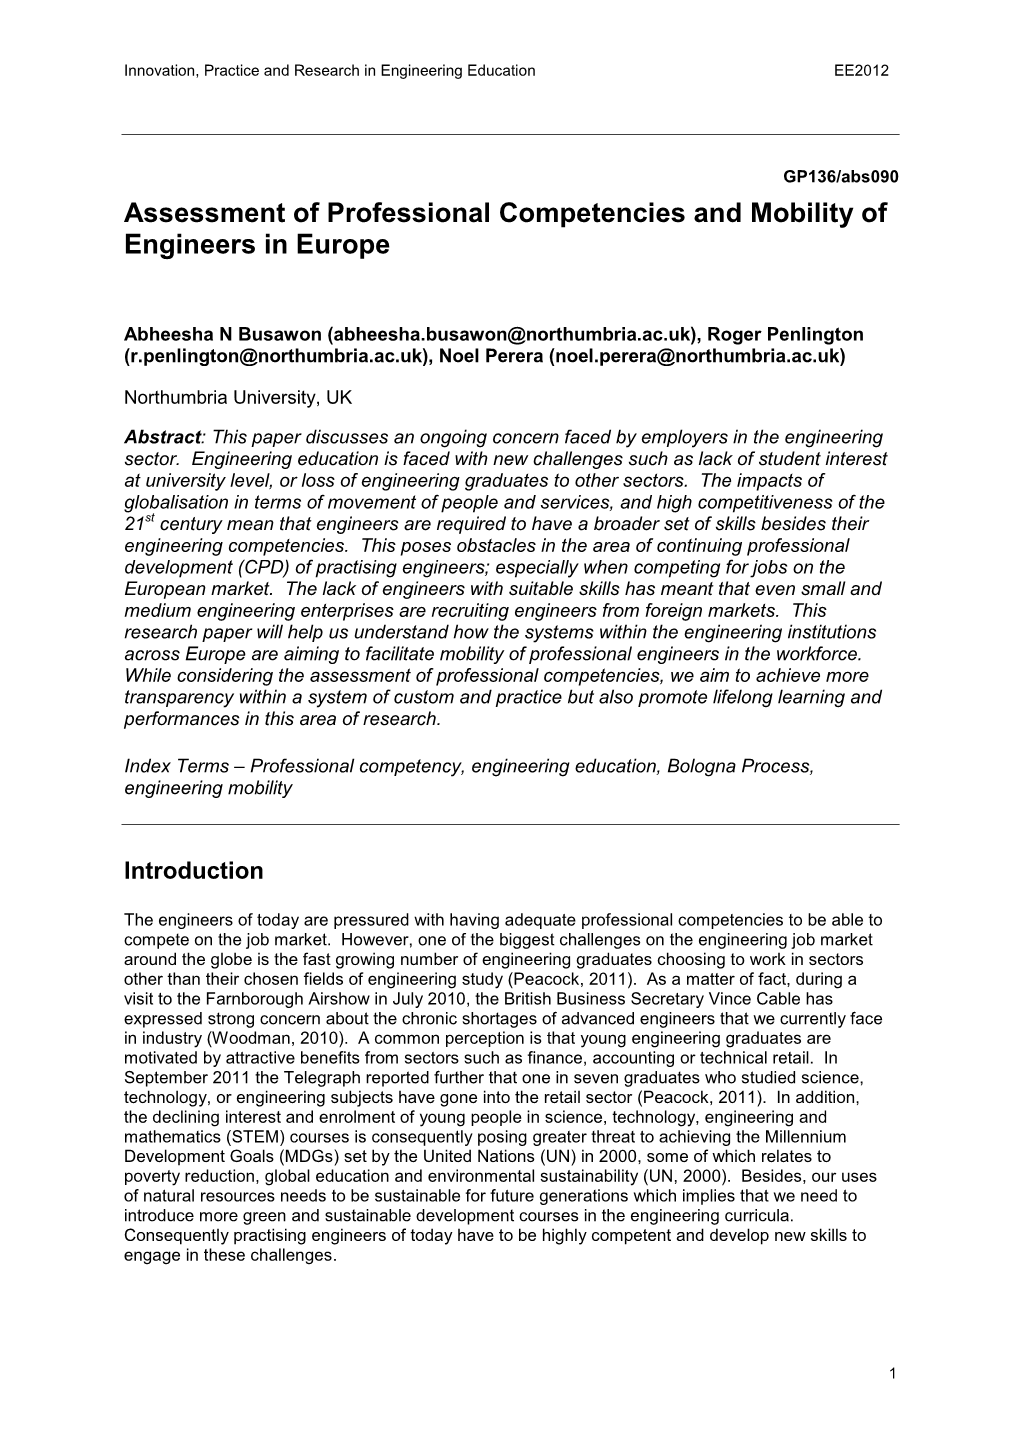 Assessment of Professional Competencies and Mobility of Engineers in Europe